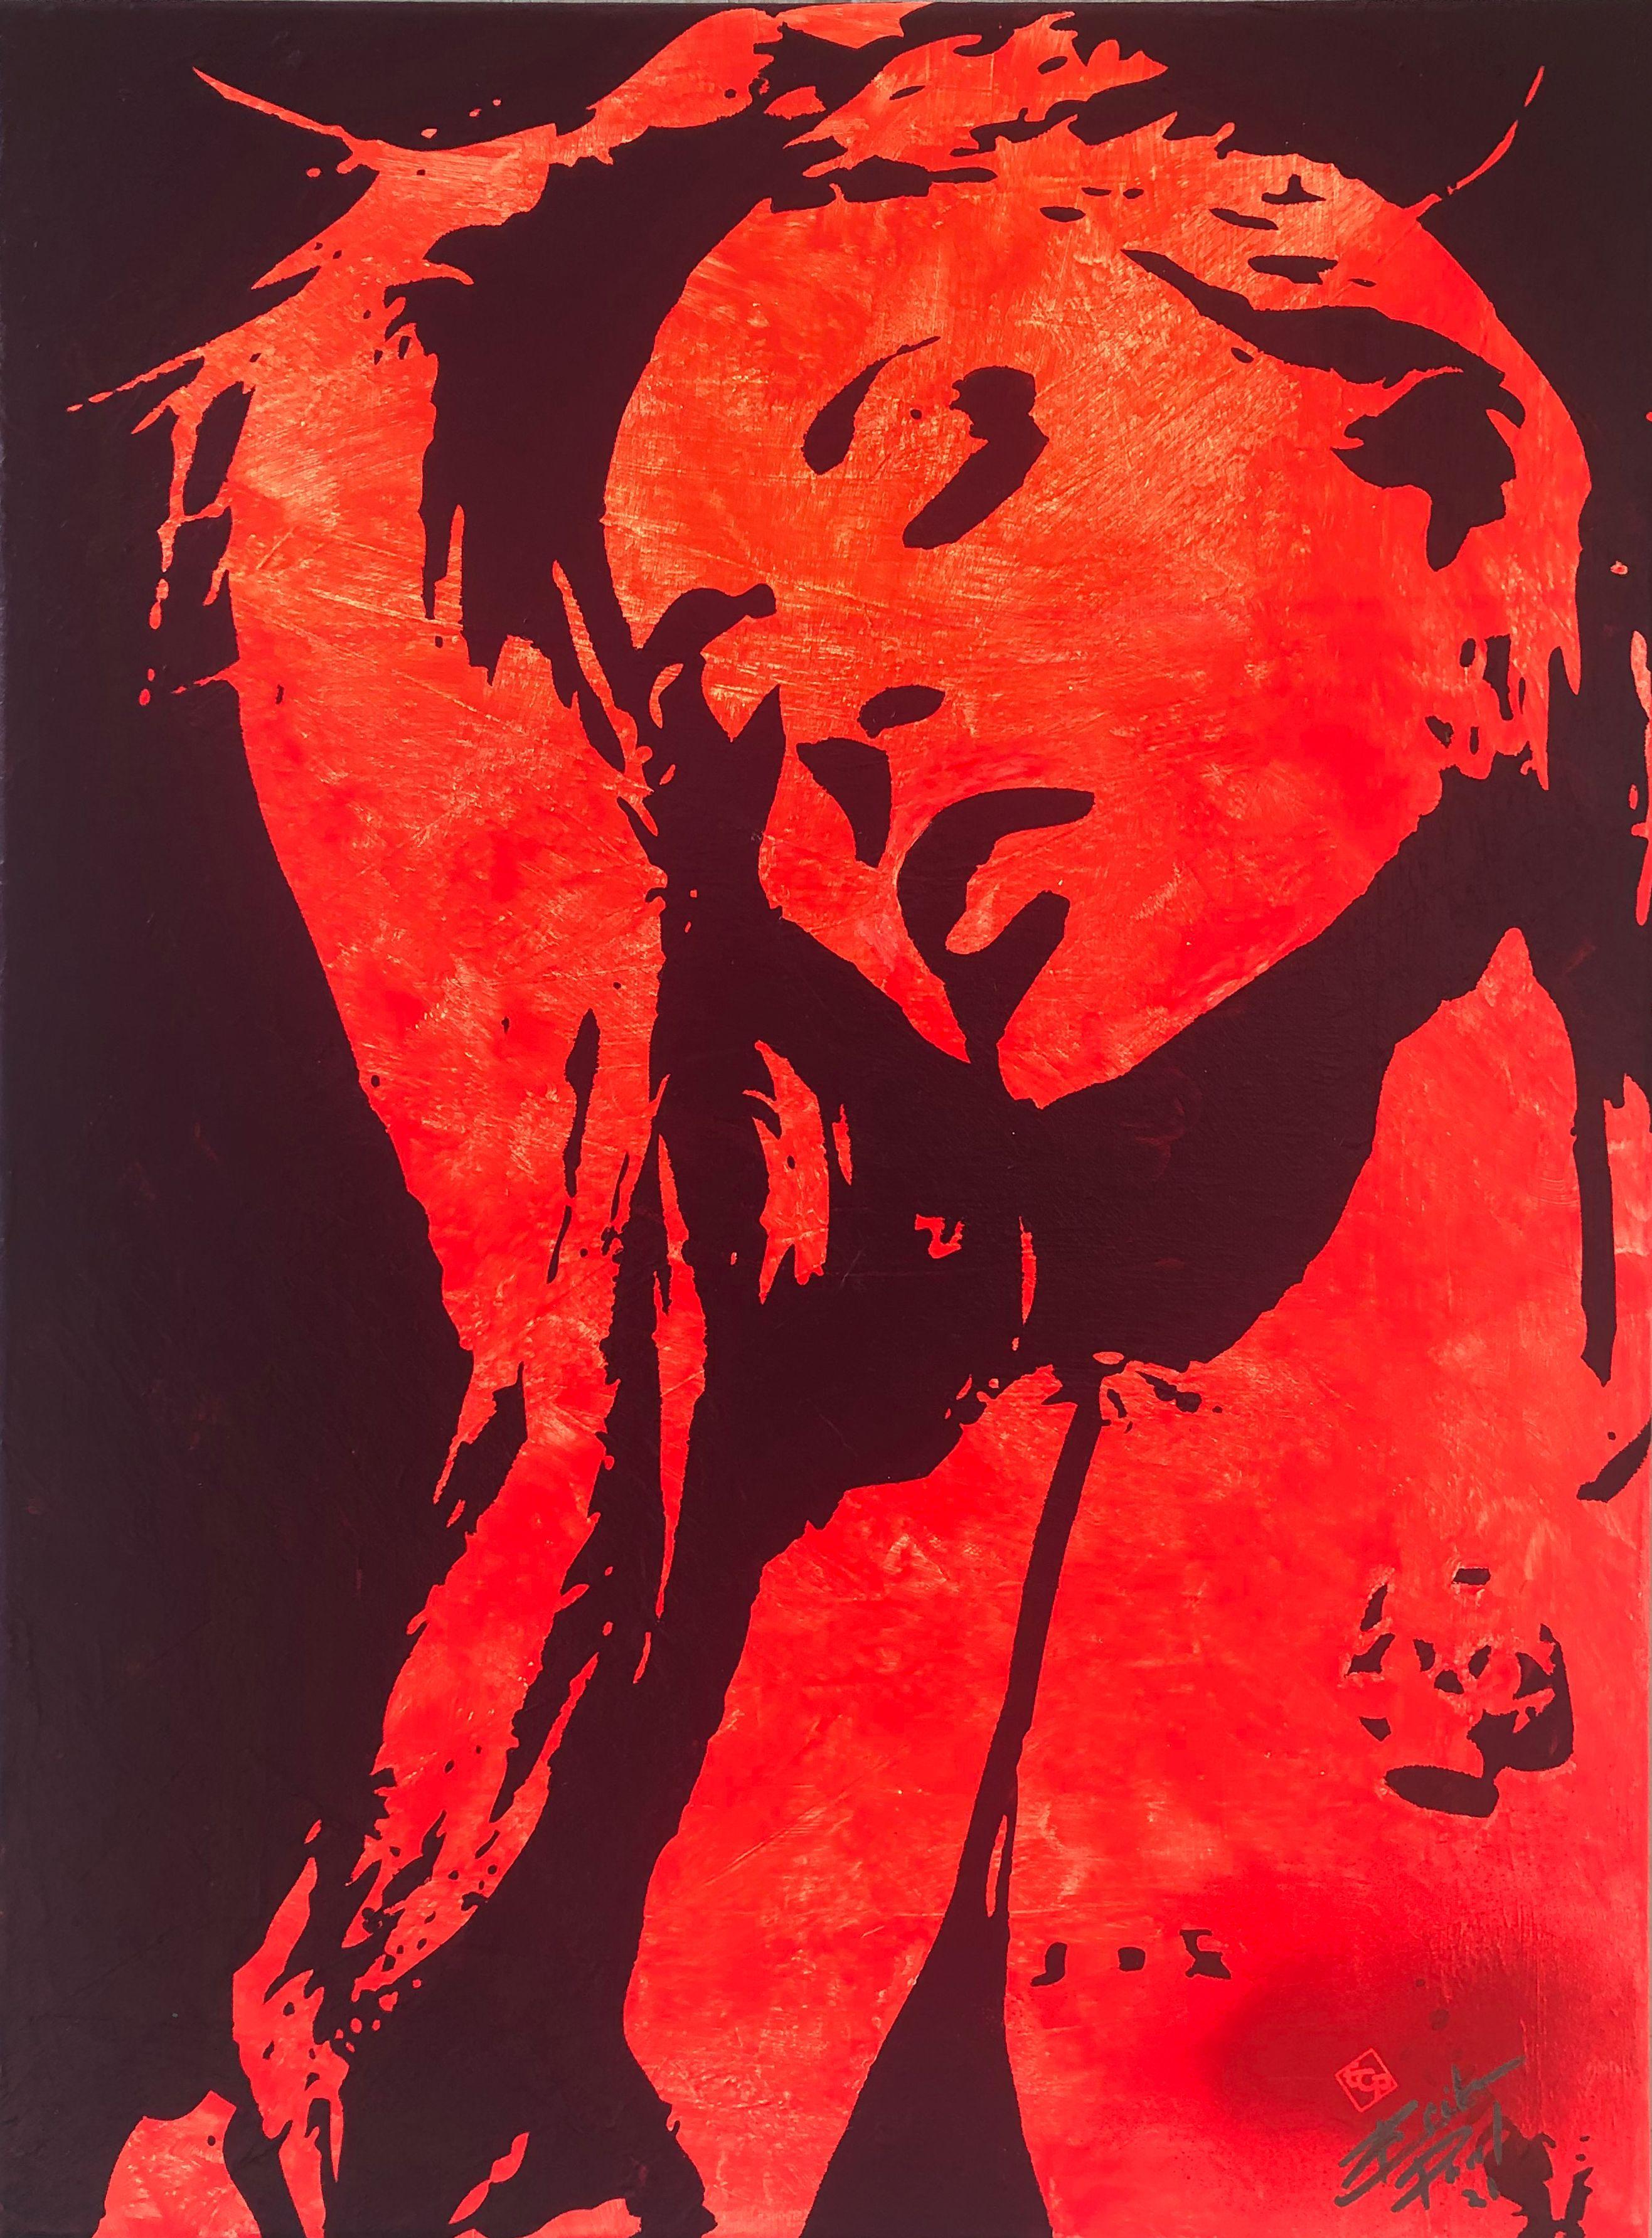 The sensual image of a beautiful woman is in a bikini Is she happy or in a state of bliss? Great conversation starter or just to stare at and admire her beauty. Painted on a reclaimed canvas Stencil art taken to a new level. Framed with an orange